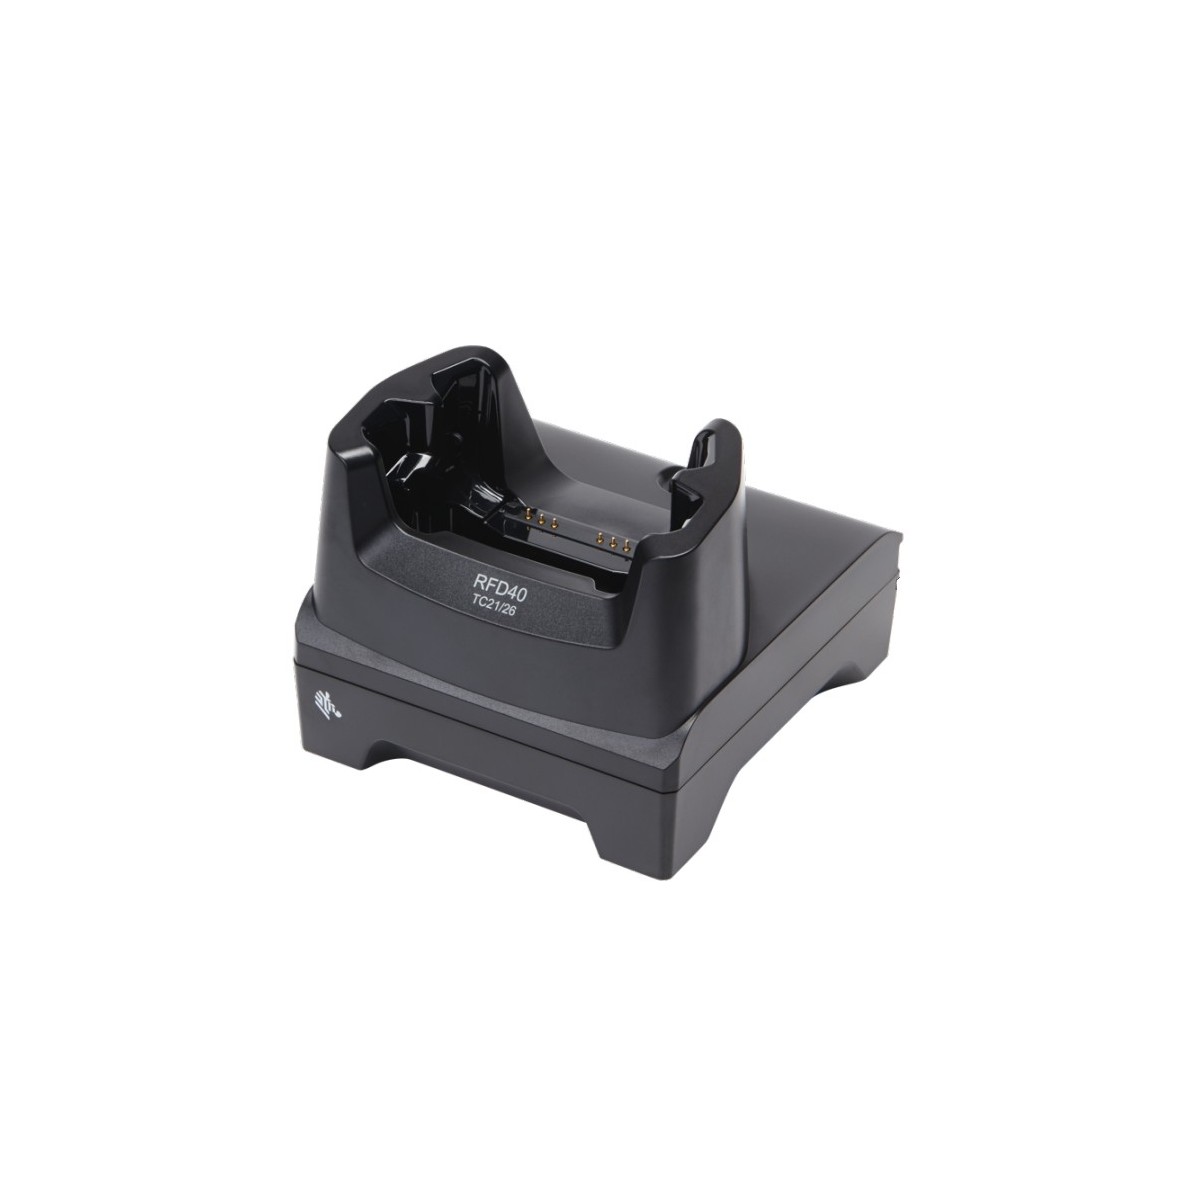 Zebra RFD40 1 DEVICE SLOT/0 TOASTER SLOTS COMMUNICATION CRADLE WITH SUPPORT FOR EC50/55.